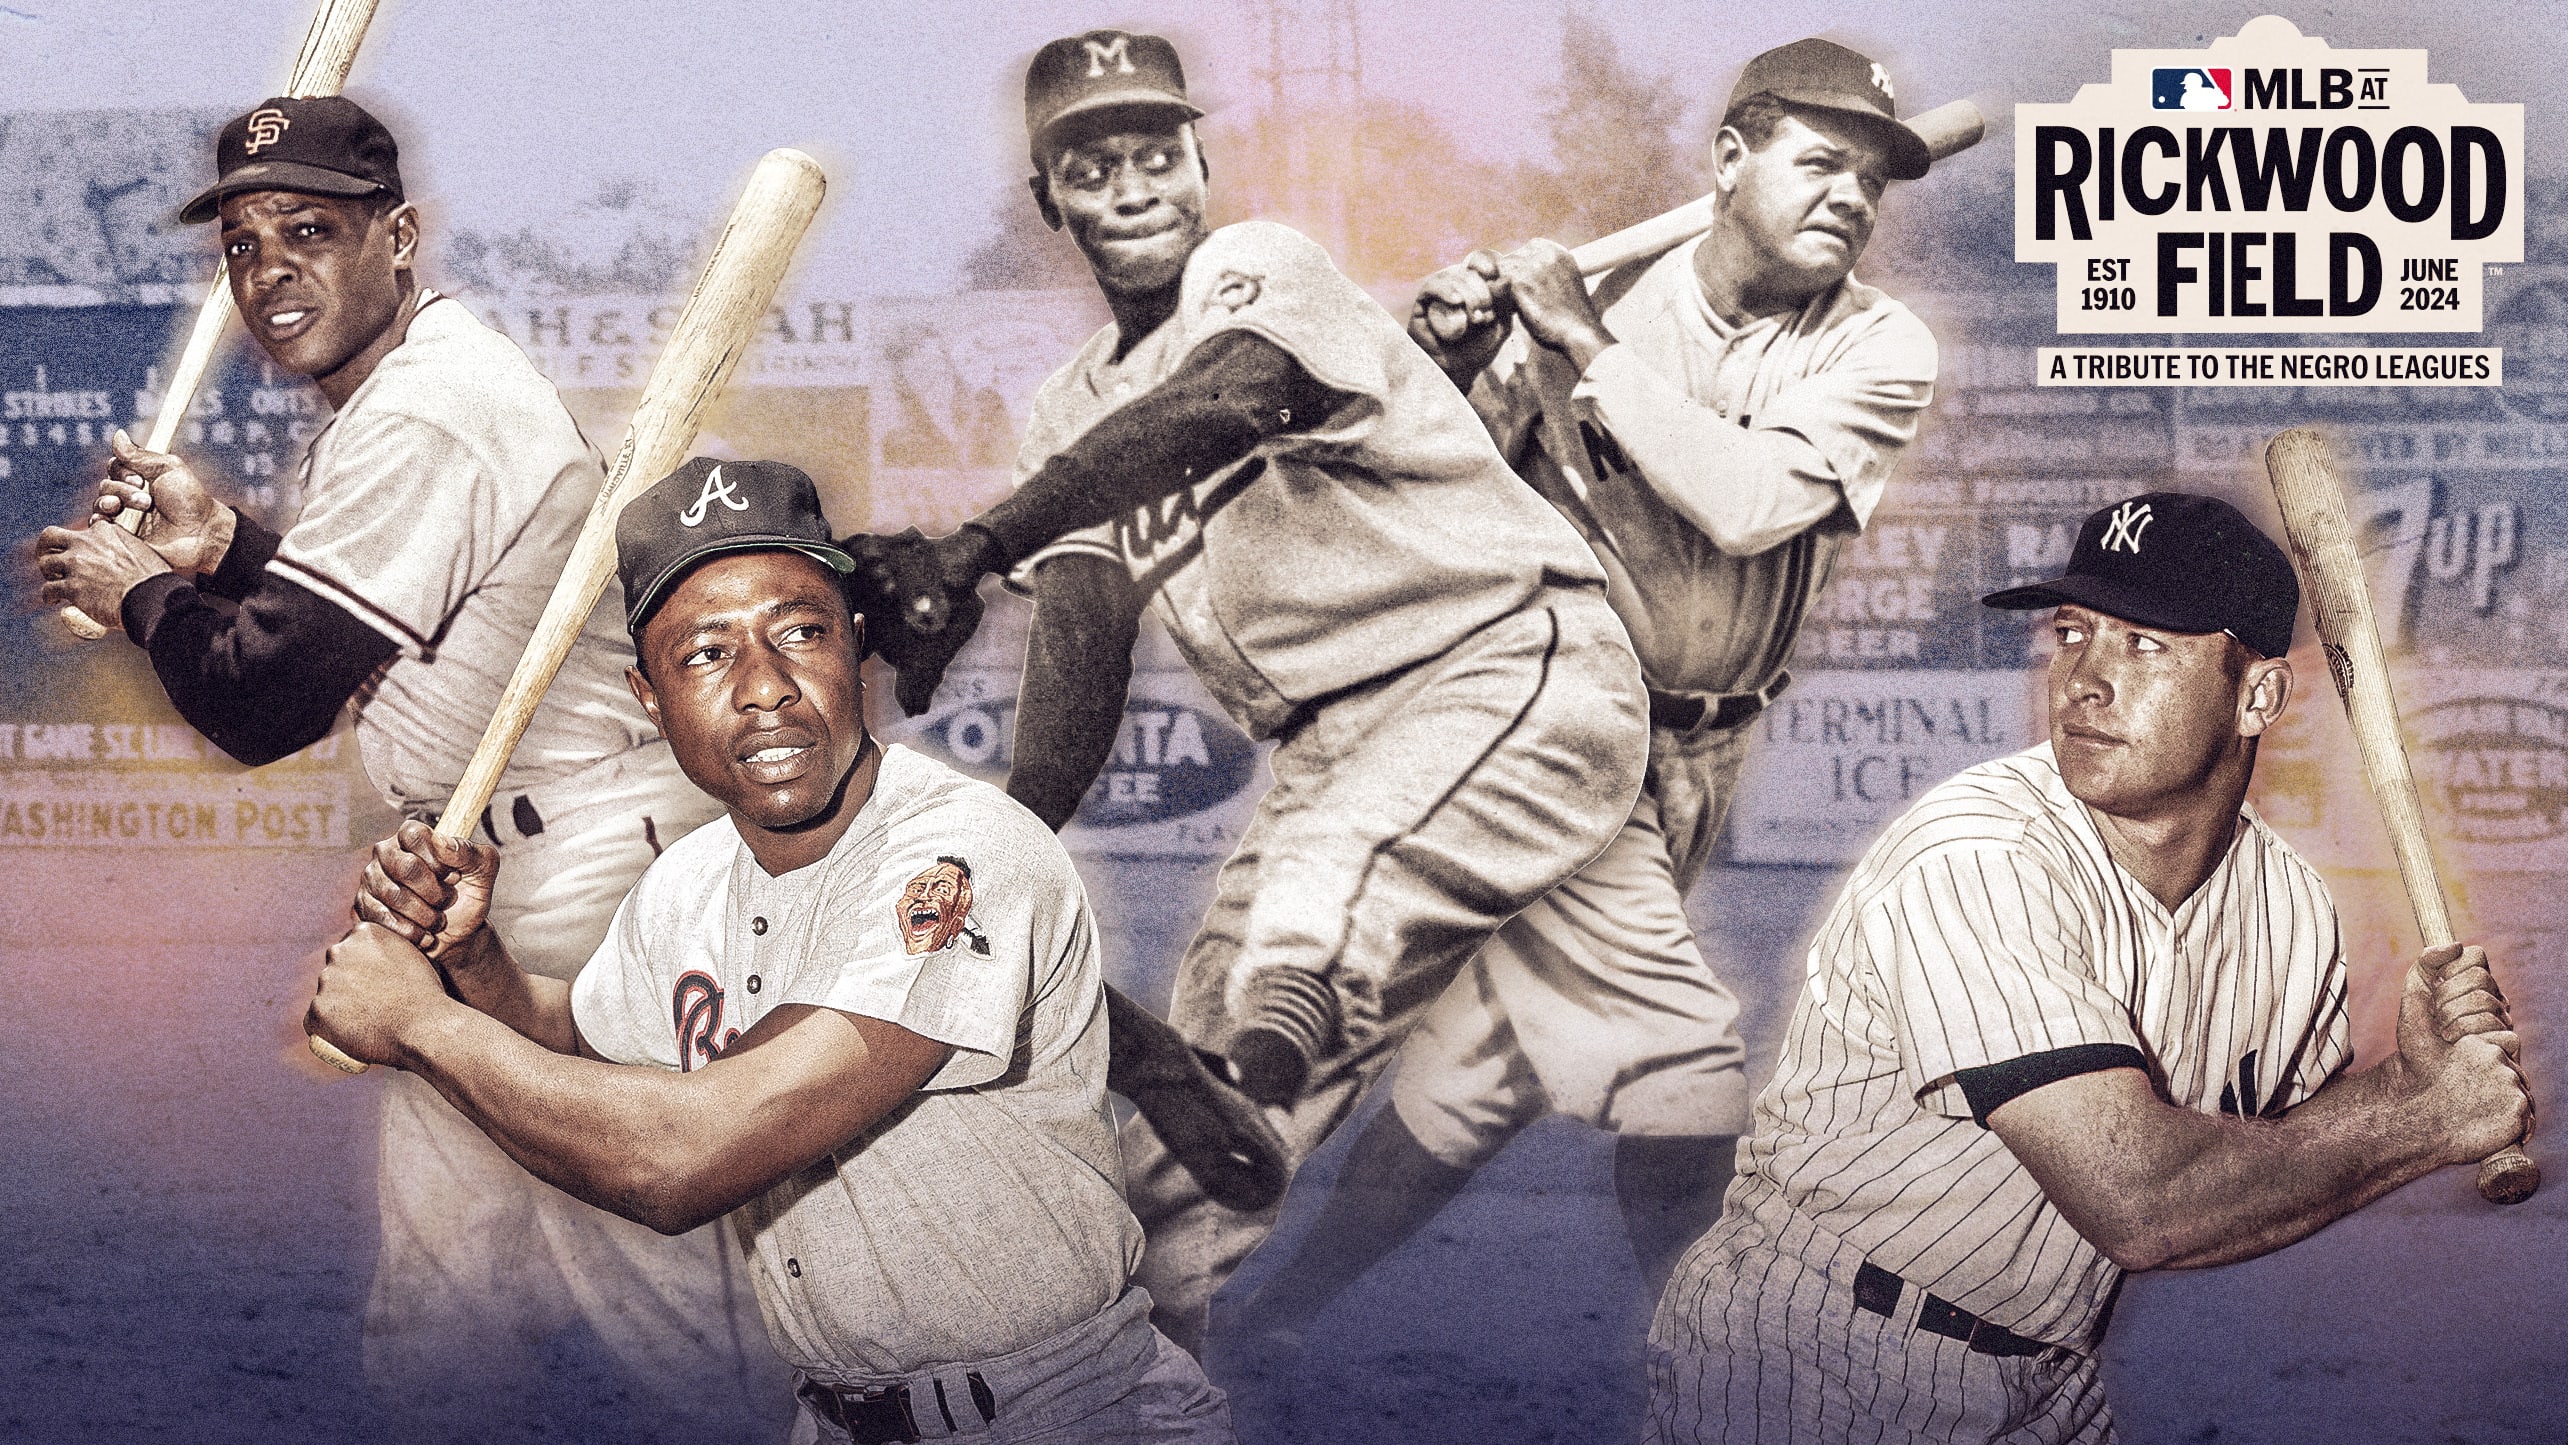 Willie Mays, Hank Aaron, Satchel Paige, Babe Ruth and Mickey Mantle